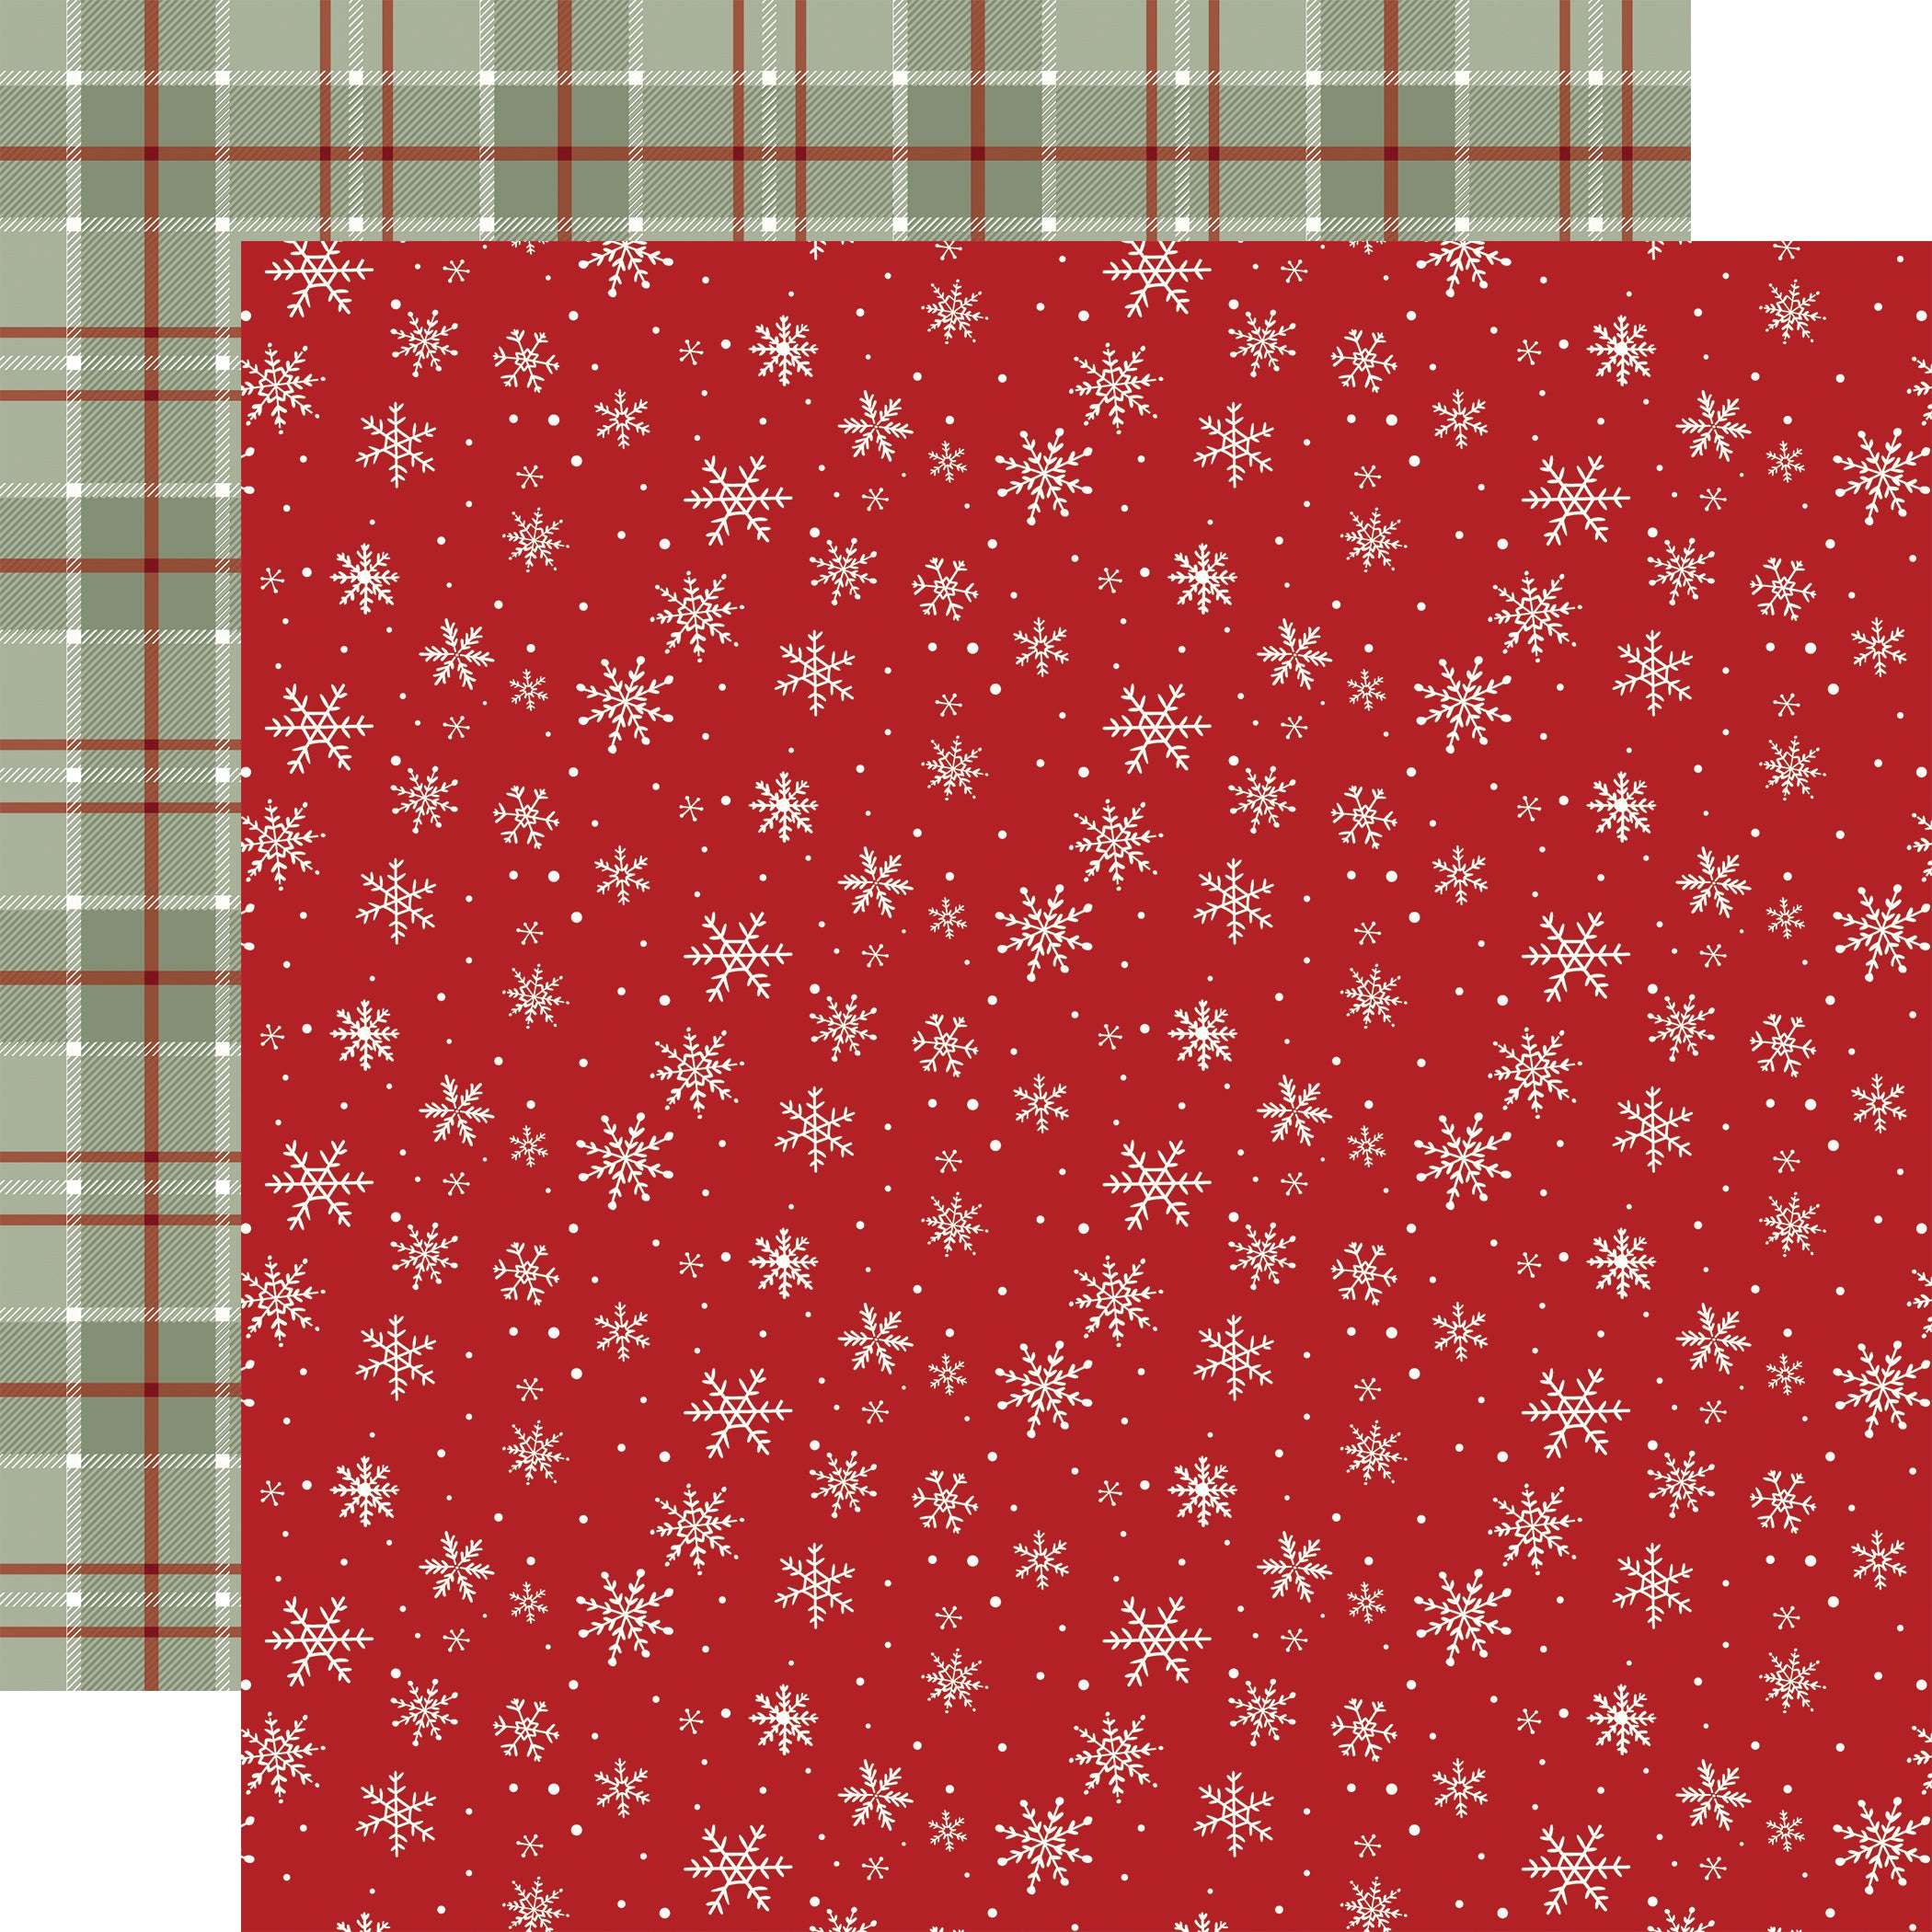 Christmas Time Collection Snowflakes Falling 12 x 12 Double-Sided Scrapbook Paper by Echo Park Paper